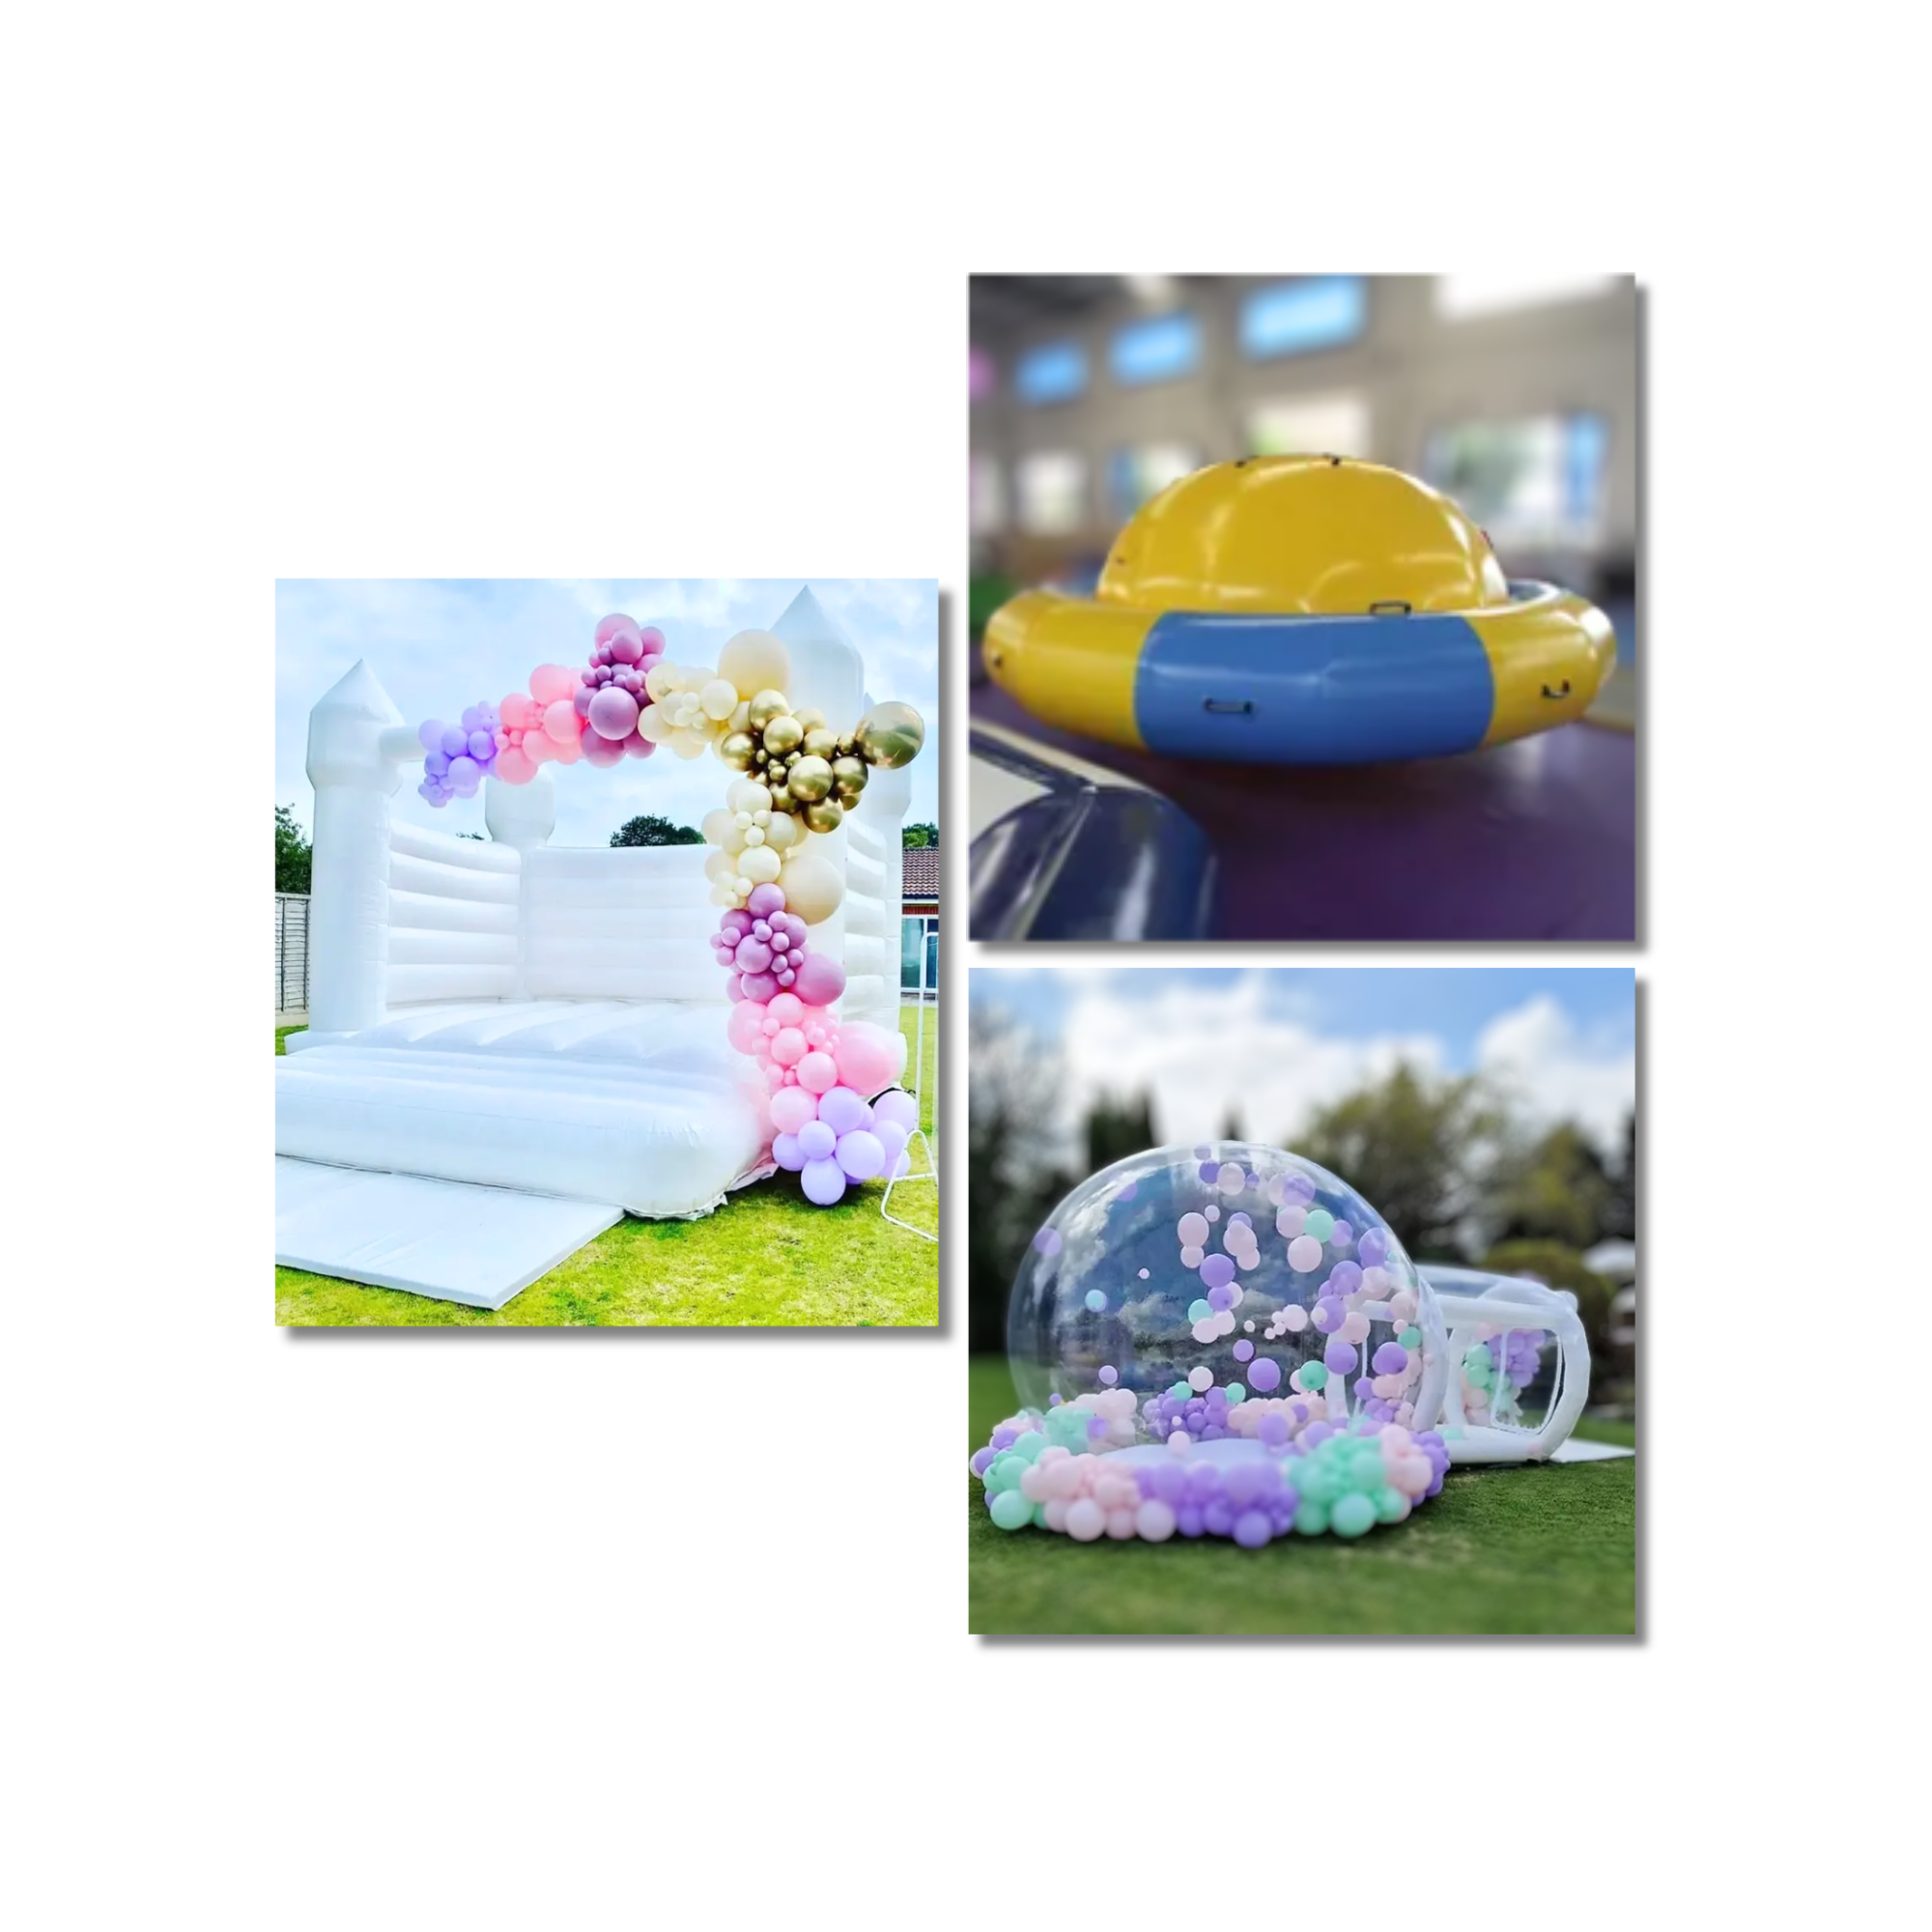 a bubble tent, inflatable saturn rocker, and a white bouncy house